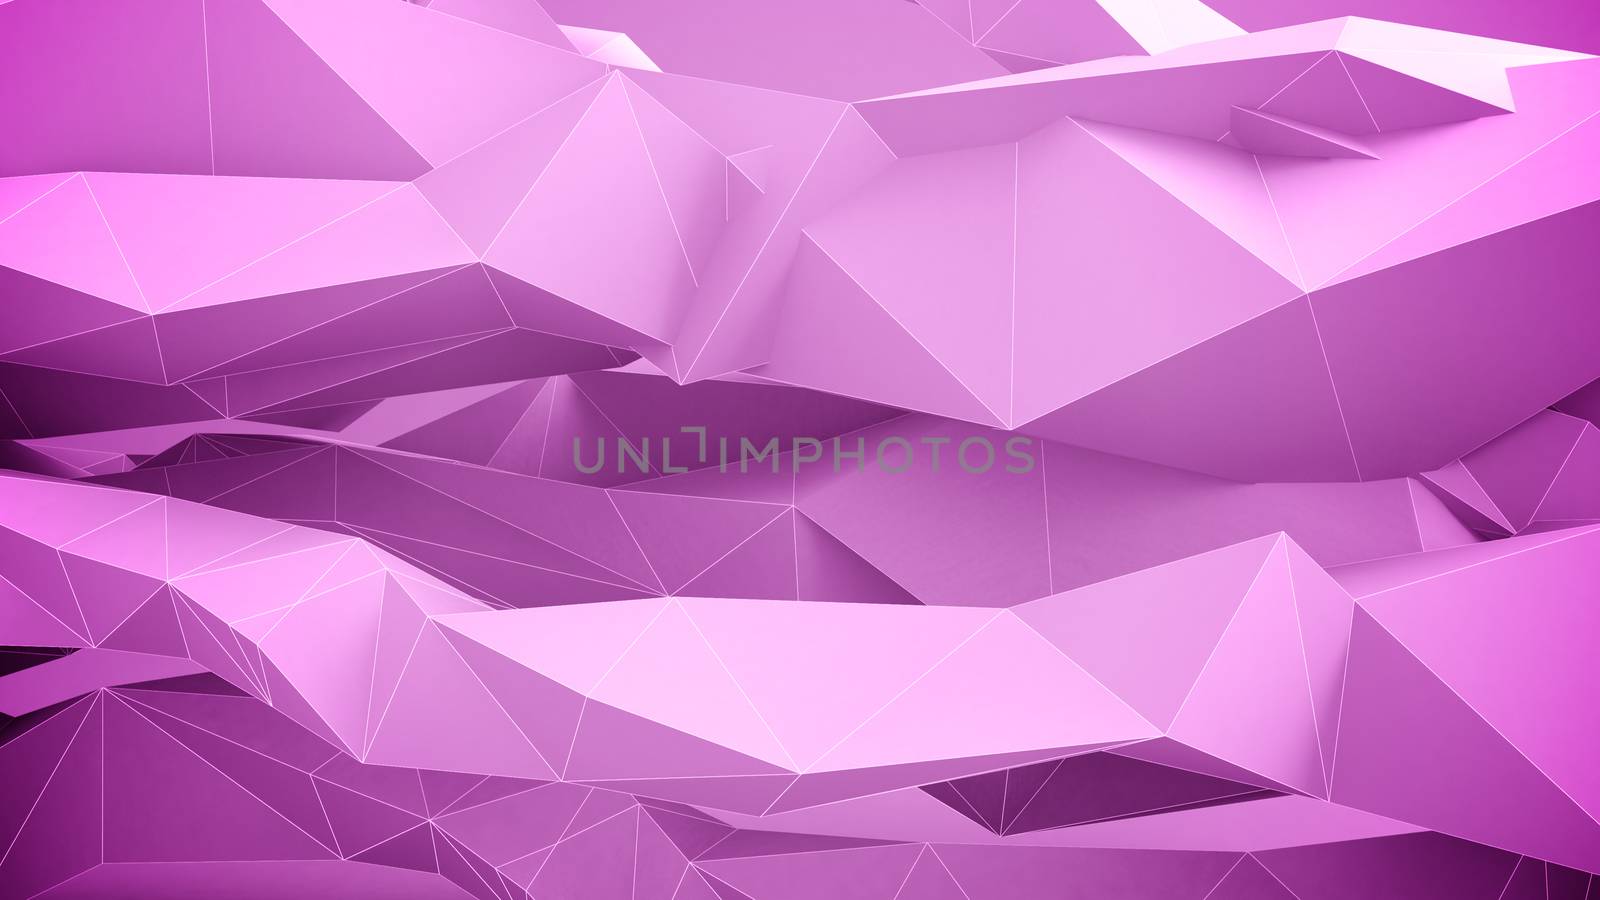 Illustration of Abstract geometric shapes. Pink.